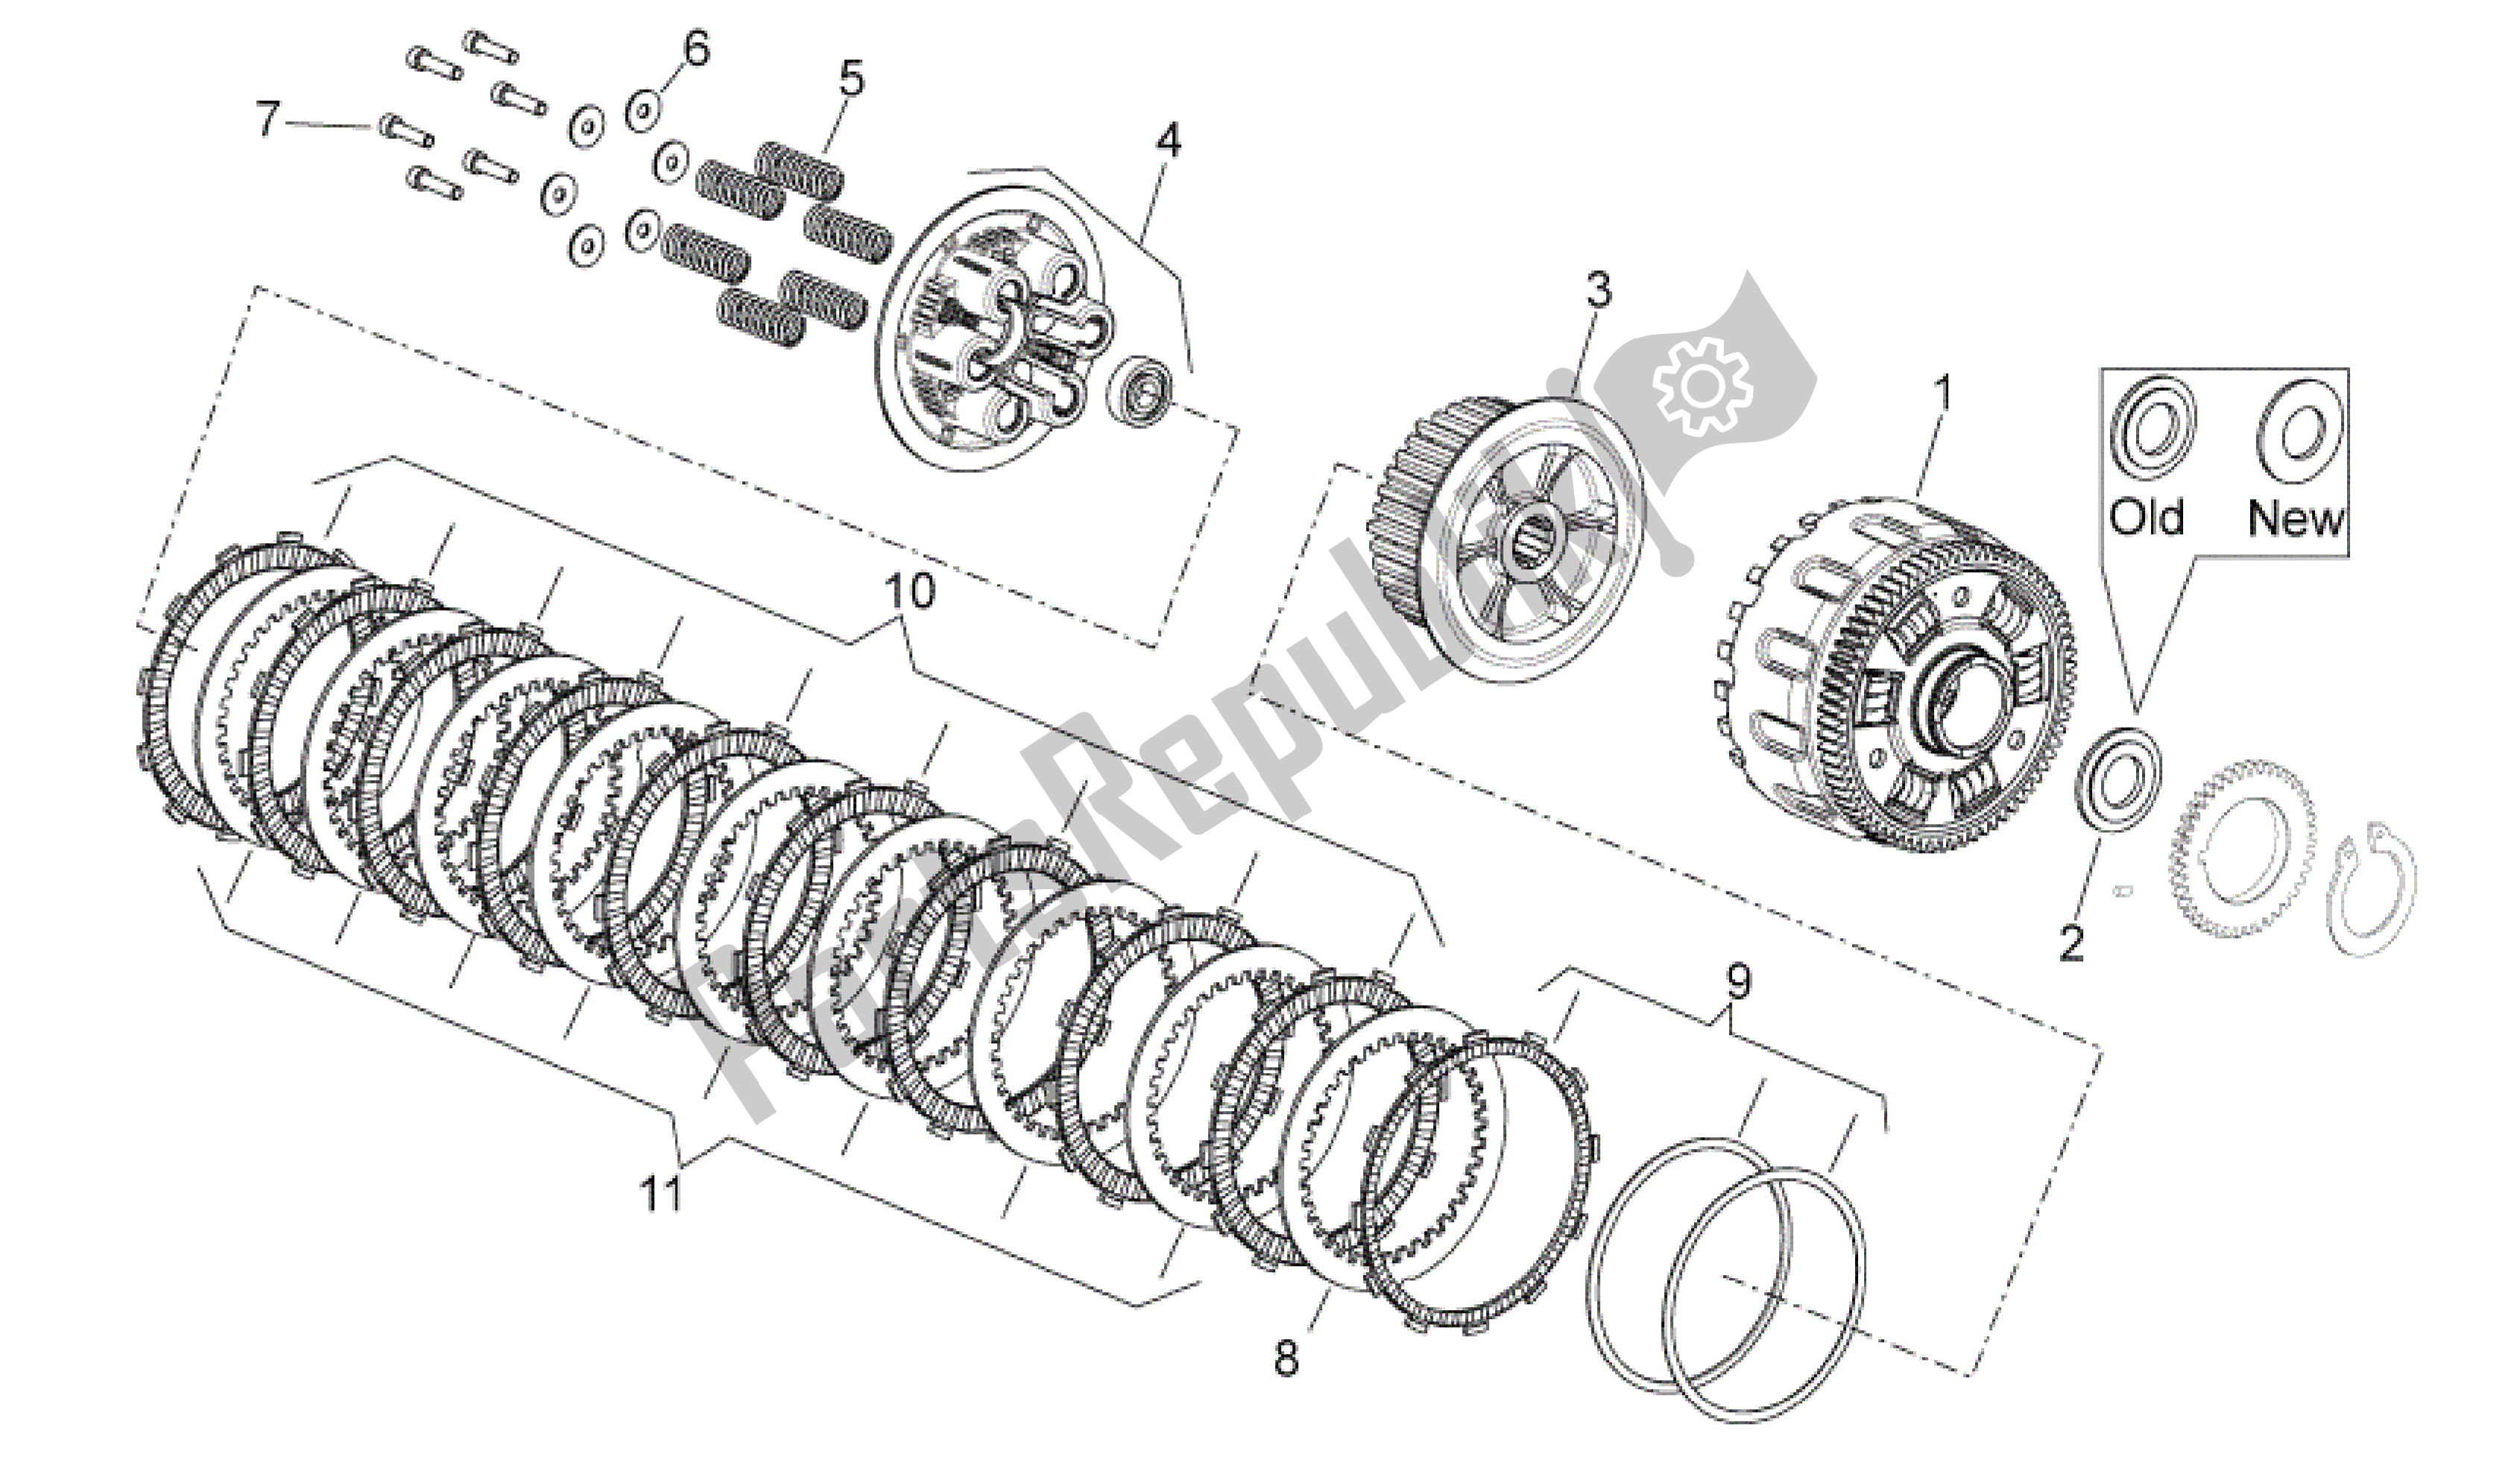 All parts for the Clutch Ii of the Aprilia Shiver 750 2009